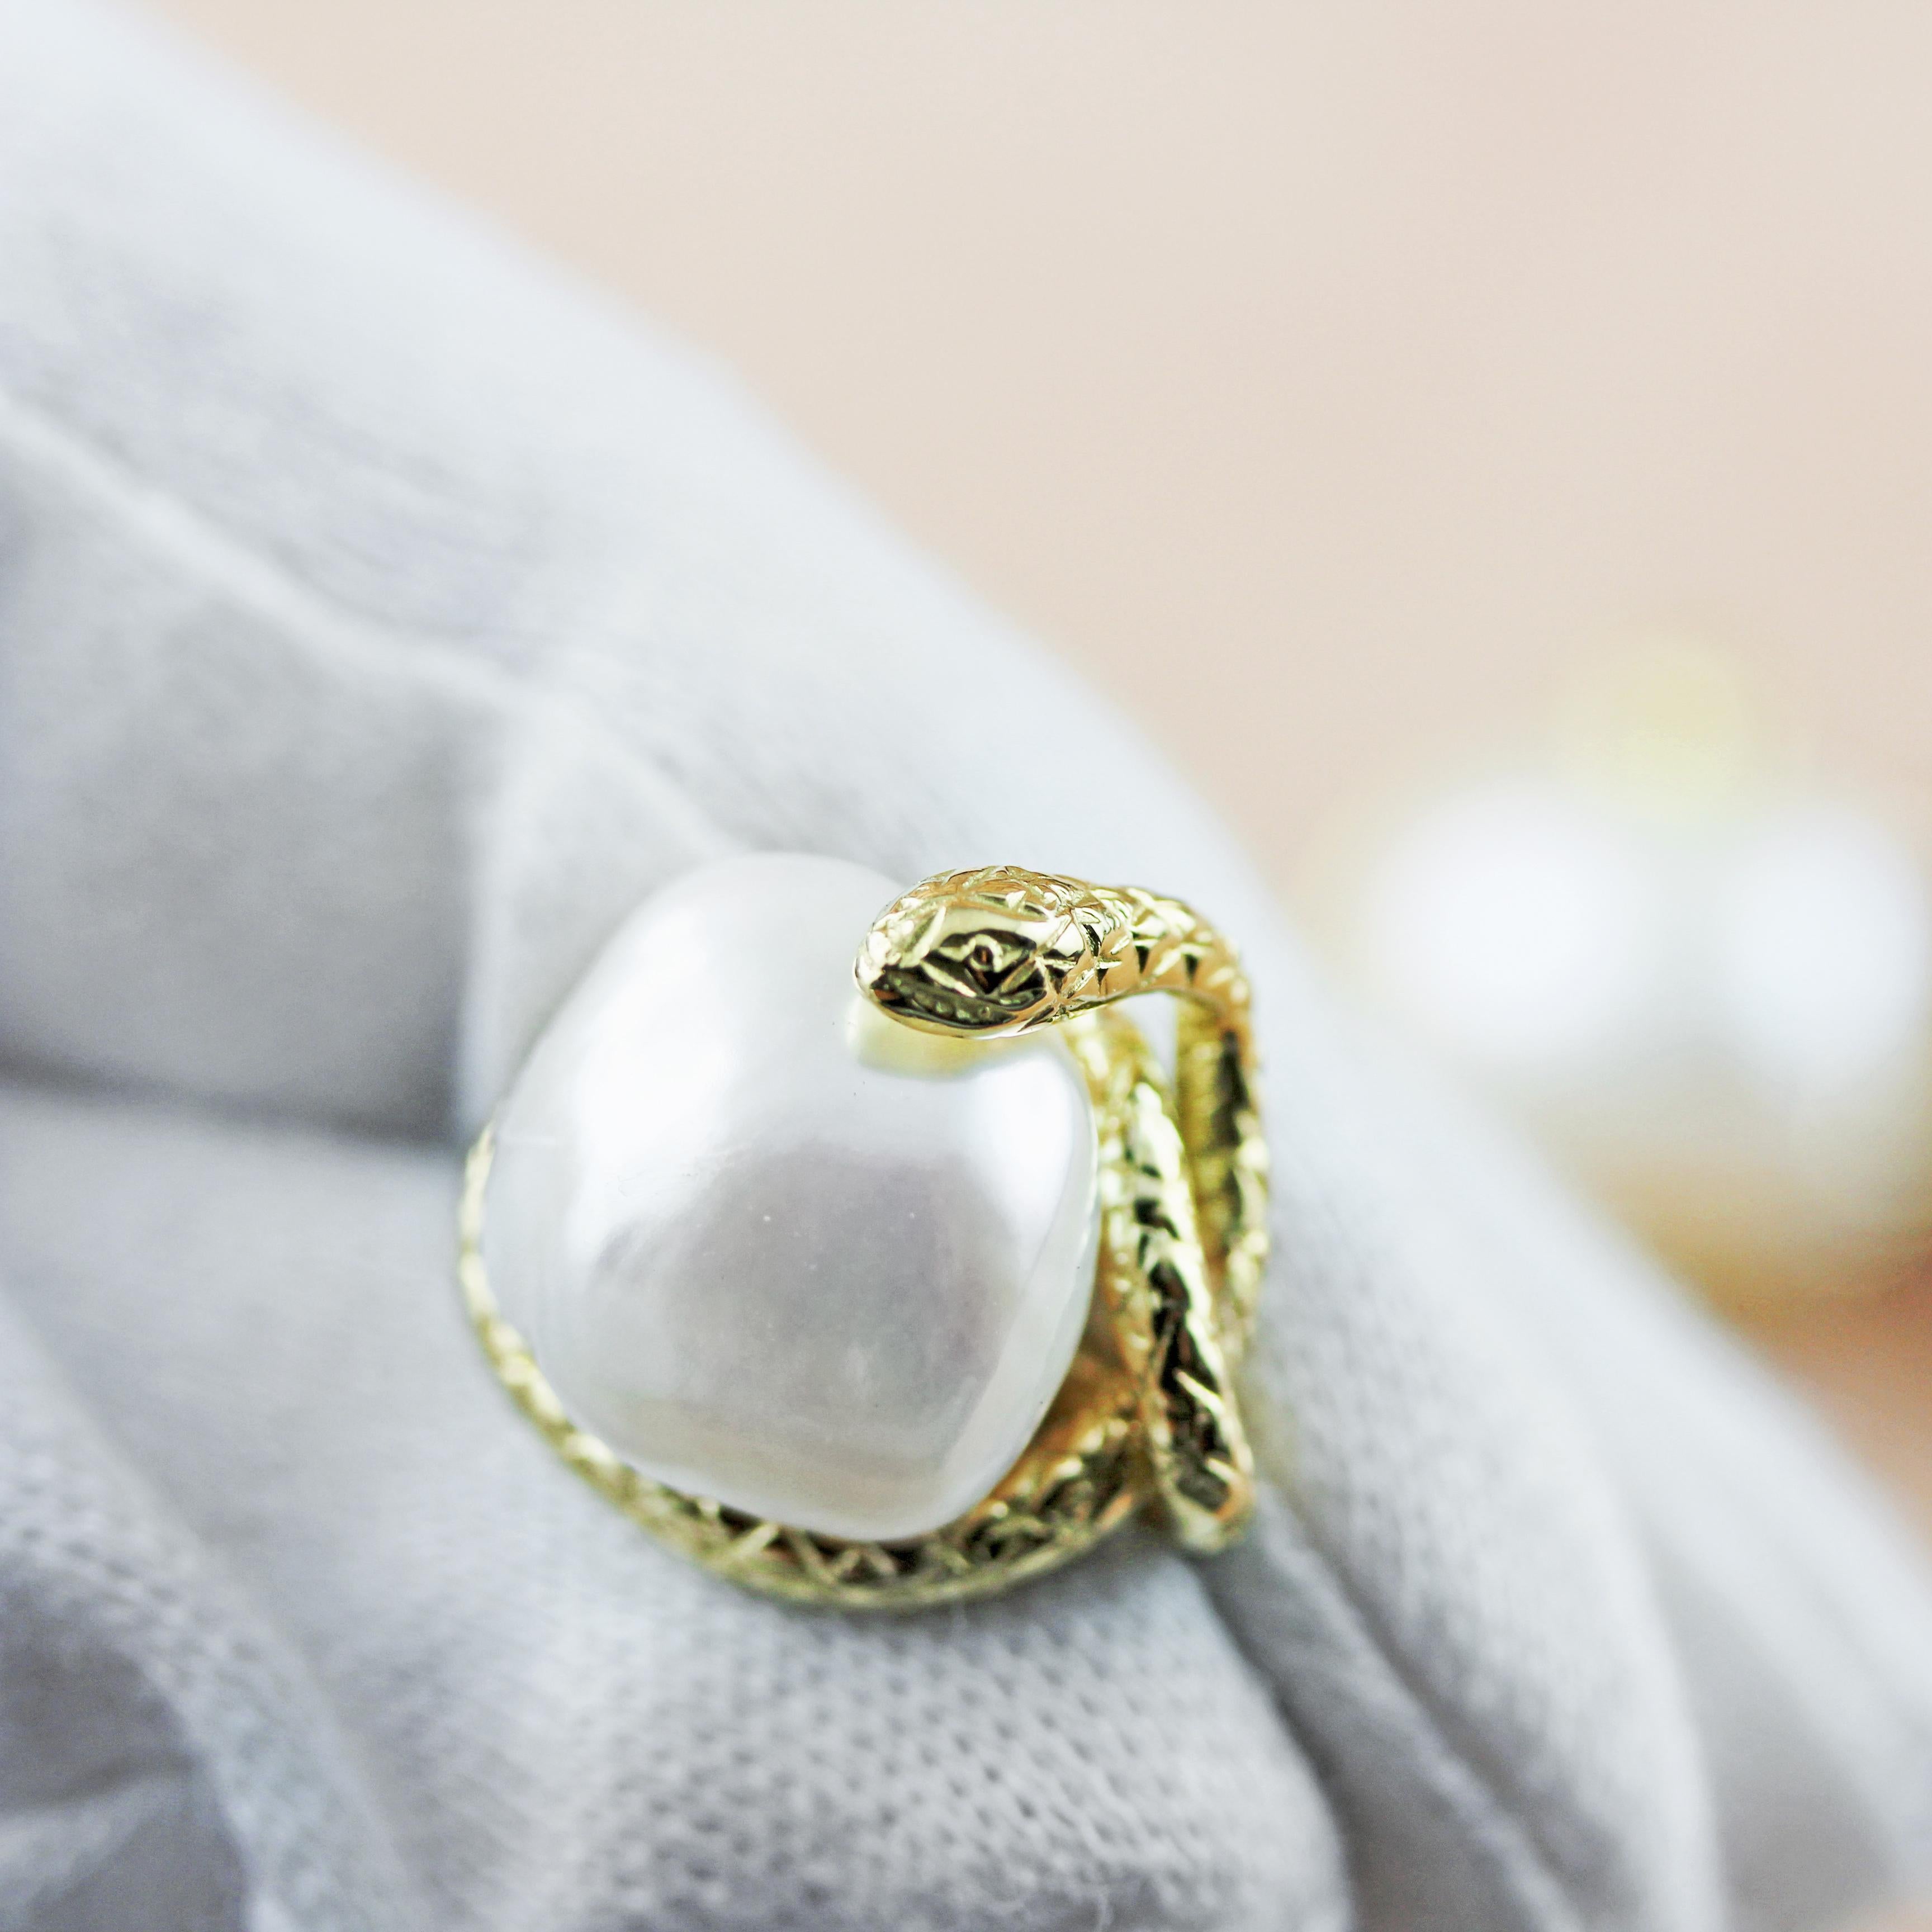 This magnificent pair of cufflinks features a baroque pearl gracing the front face, mounted on an 18 karat yellow gold piece shaped as a snake coiled all around the pearl. In gold is also the post that wraps around the cylindrical shape of the